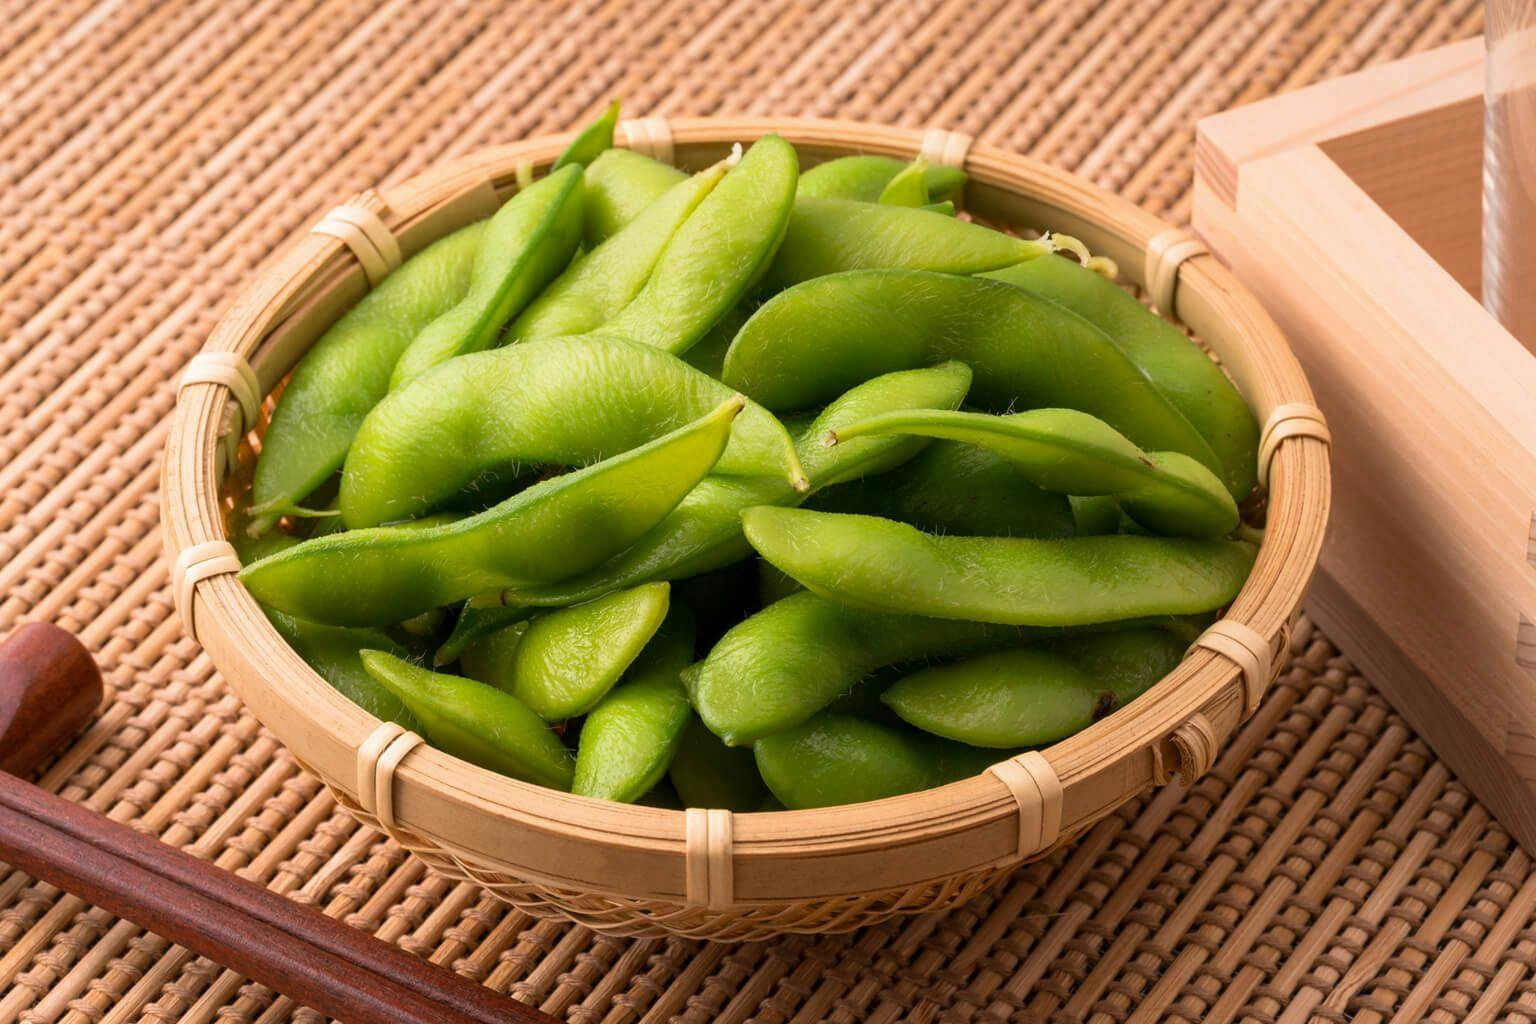 Edamame is a healthy snack